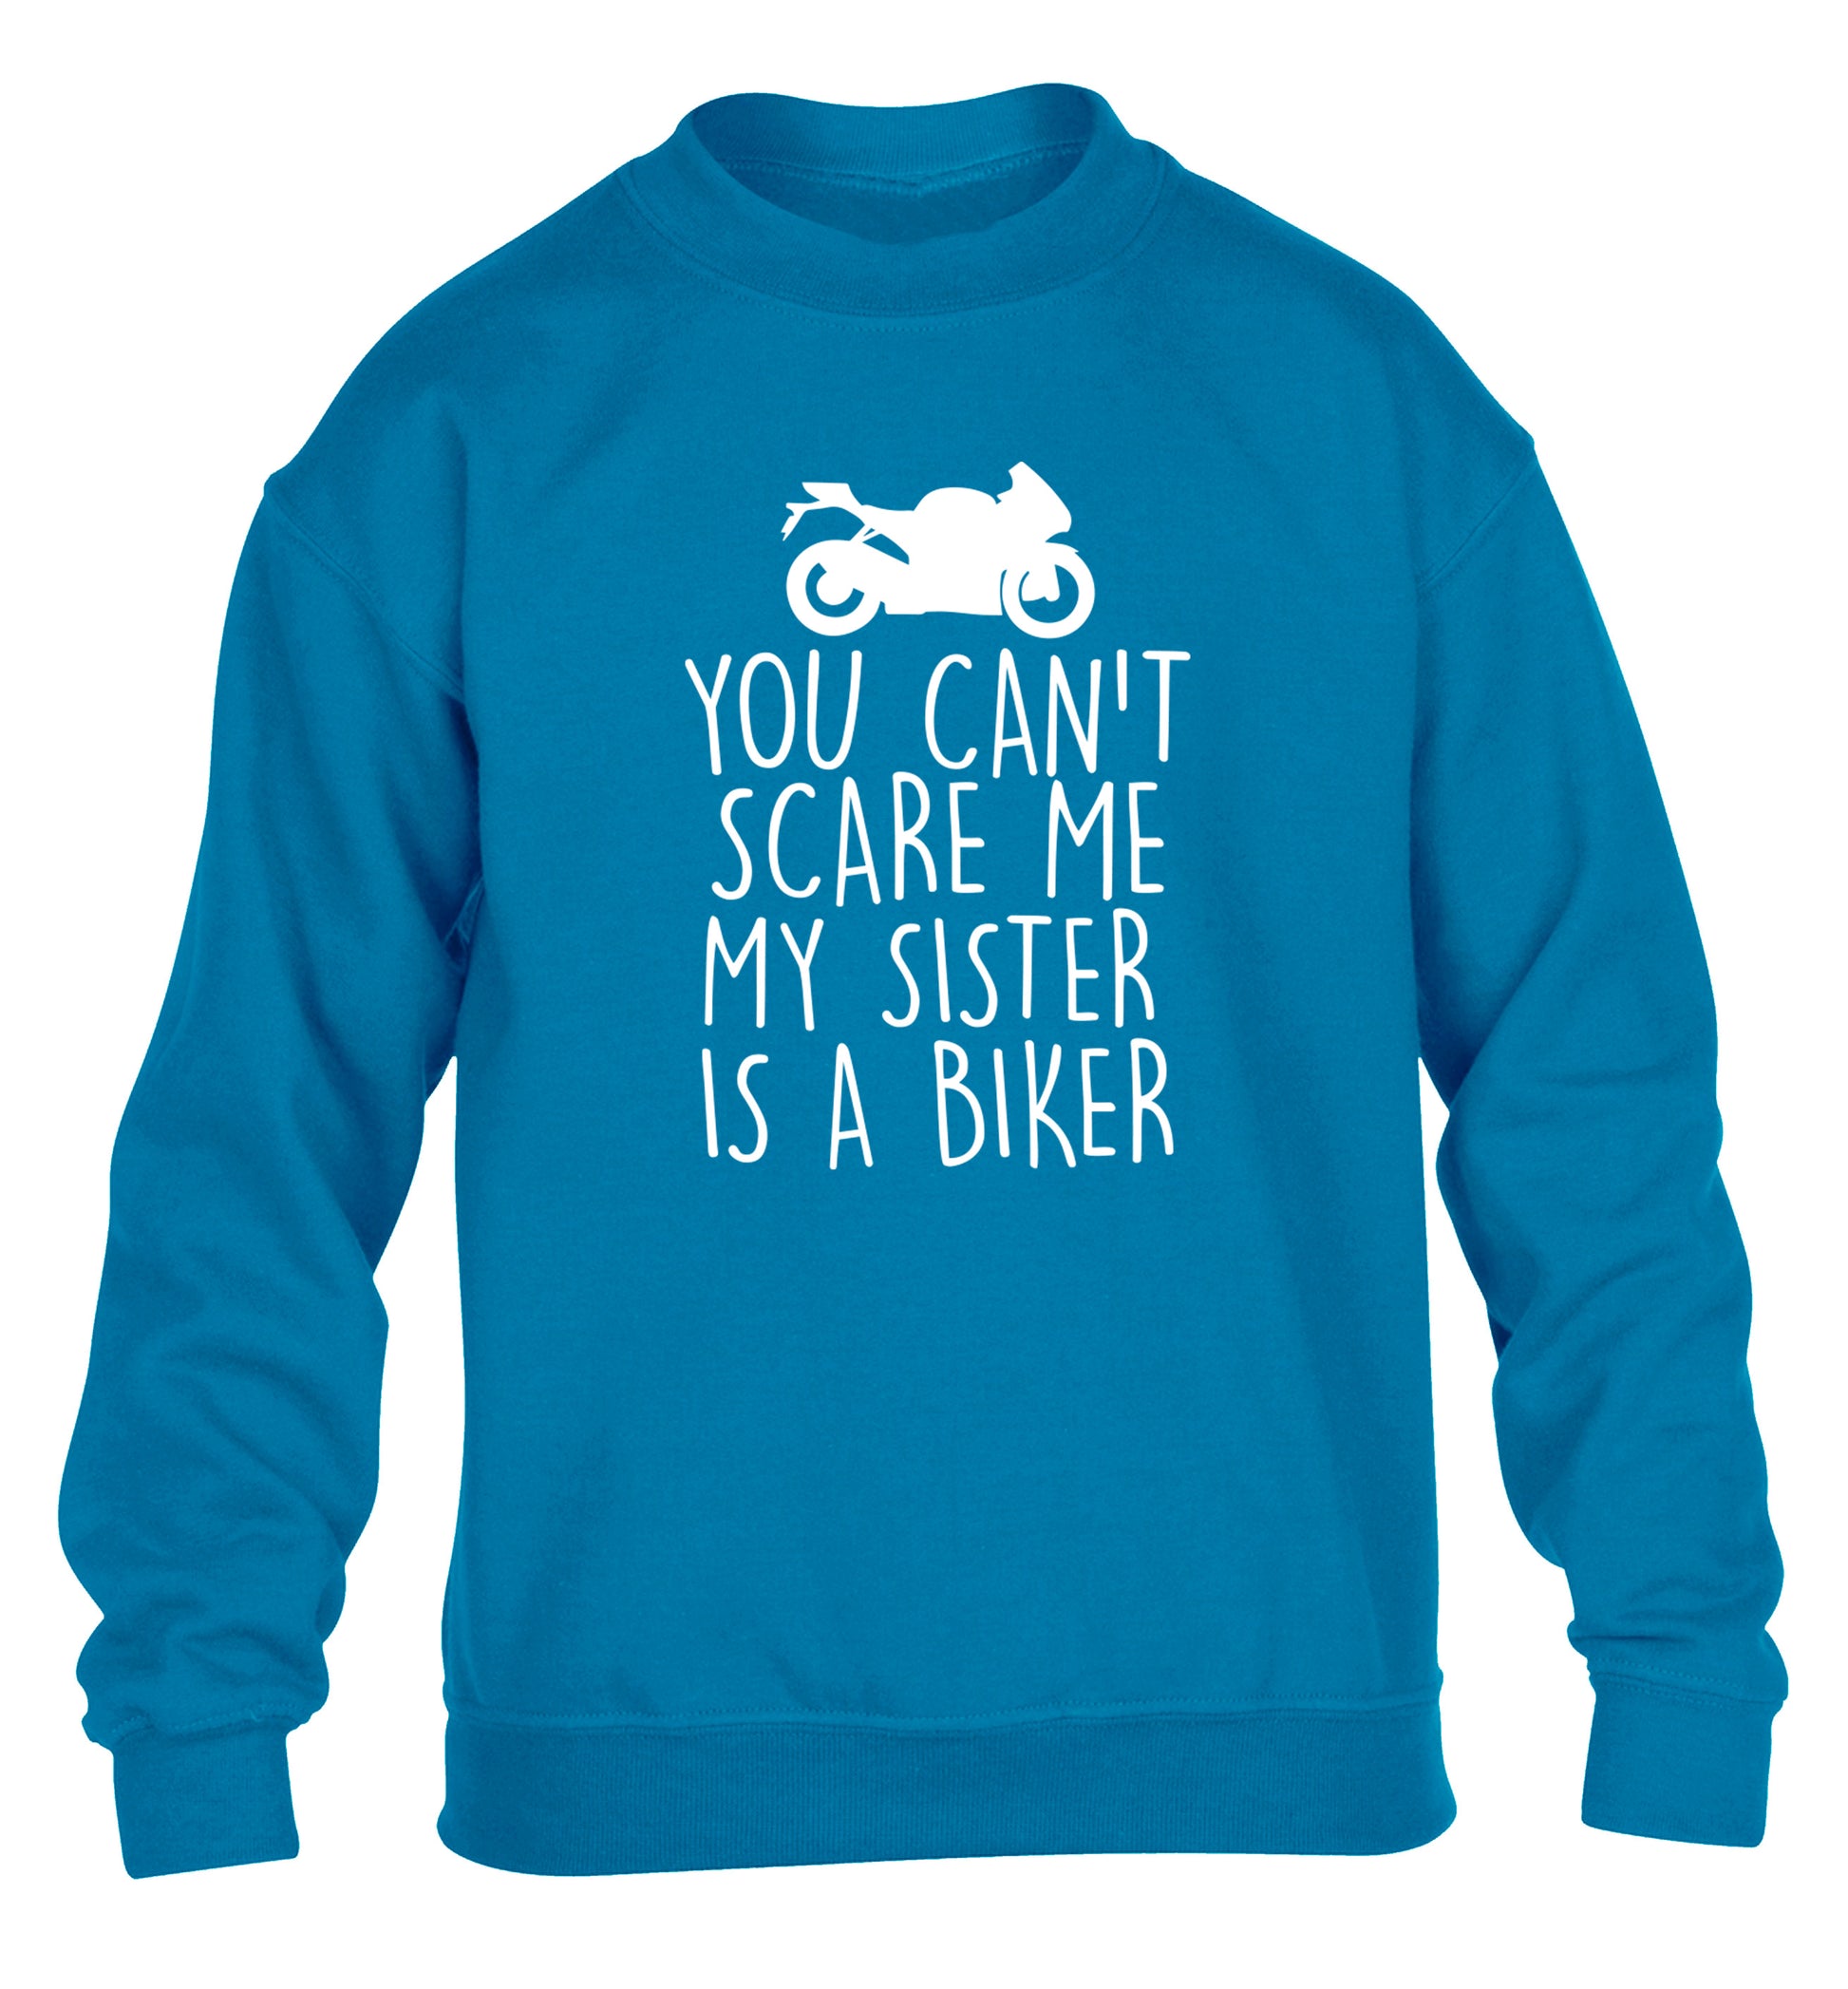 You can't scare me my sister is a biker children's blue sweater 12-13 Years